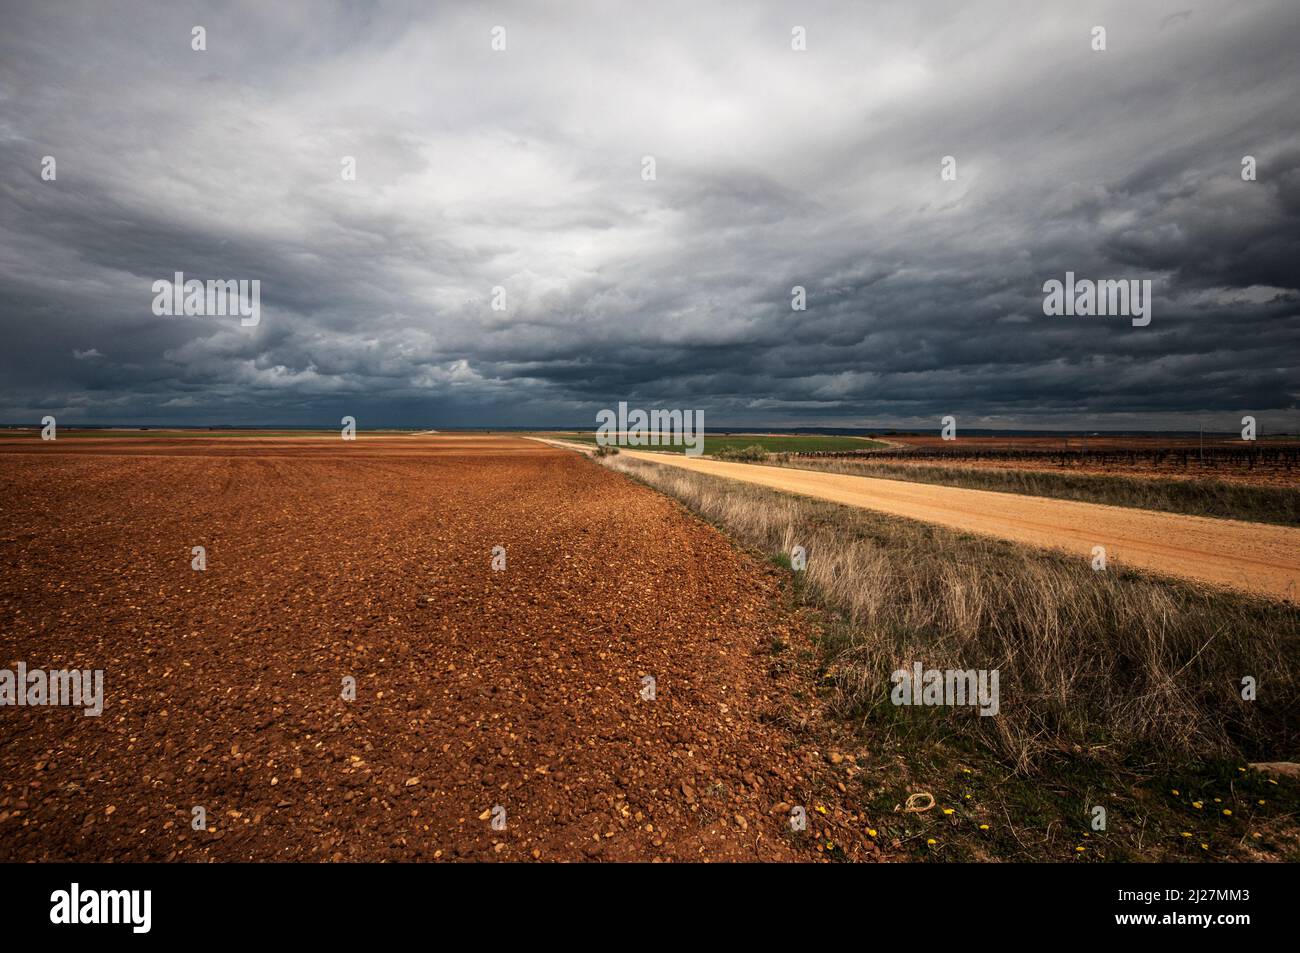 A gravel road in nature leads the view towards the bottom of the image, to the horizon, where a dark gray sky threatening rain begins. Stock Photo